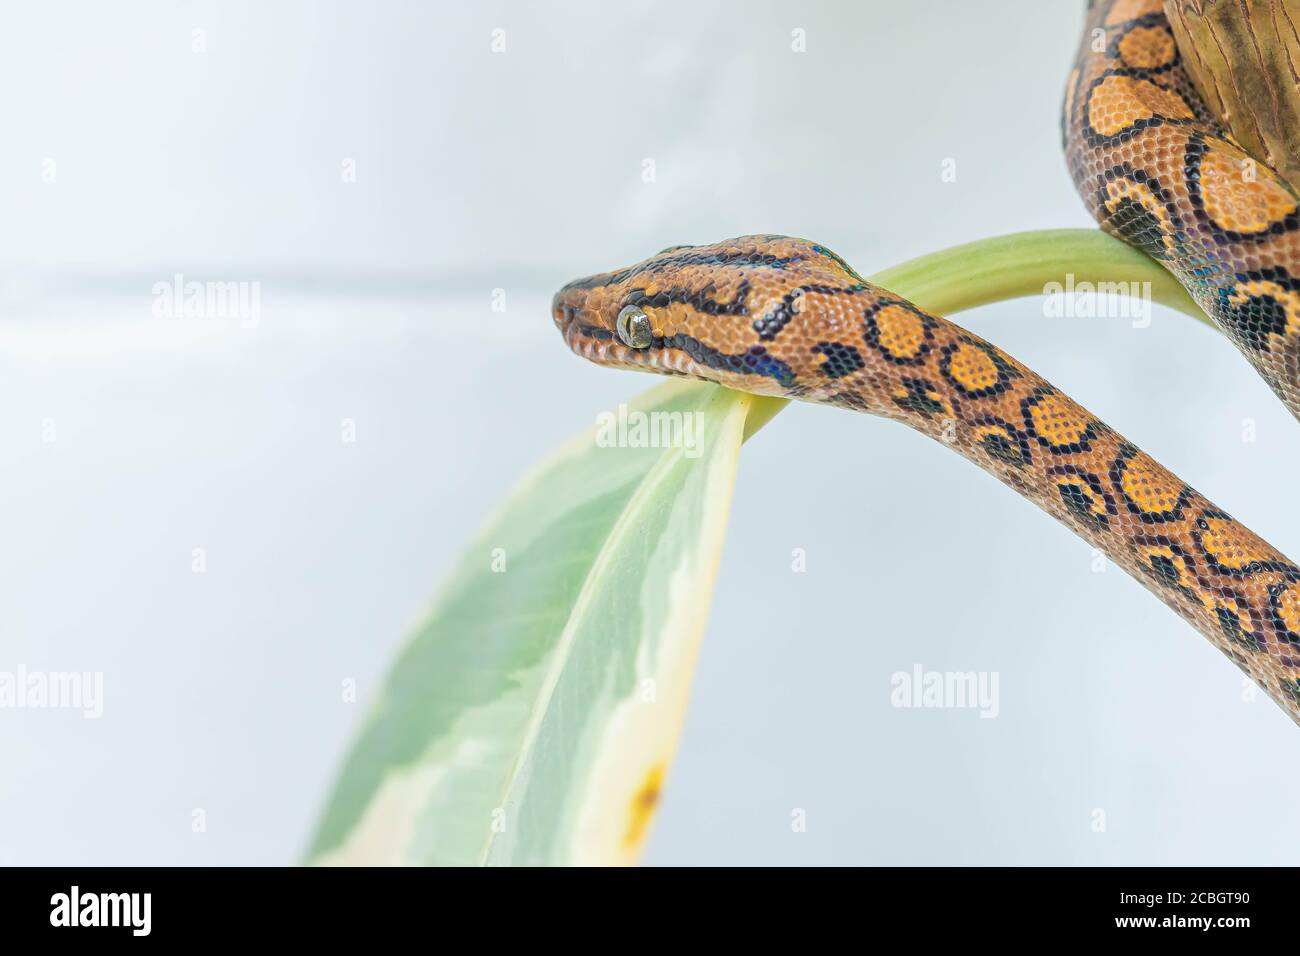 https://c8.alamy.com/comp/2CBGT90/head-of-epicrates-cenchria-on-leaf-of-rubber-fig-and-looking-away-curled-up-snake-exotic-pet-poster-wallpaper-close-up-macro-2CBGT90.jpg